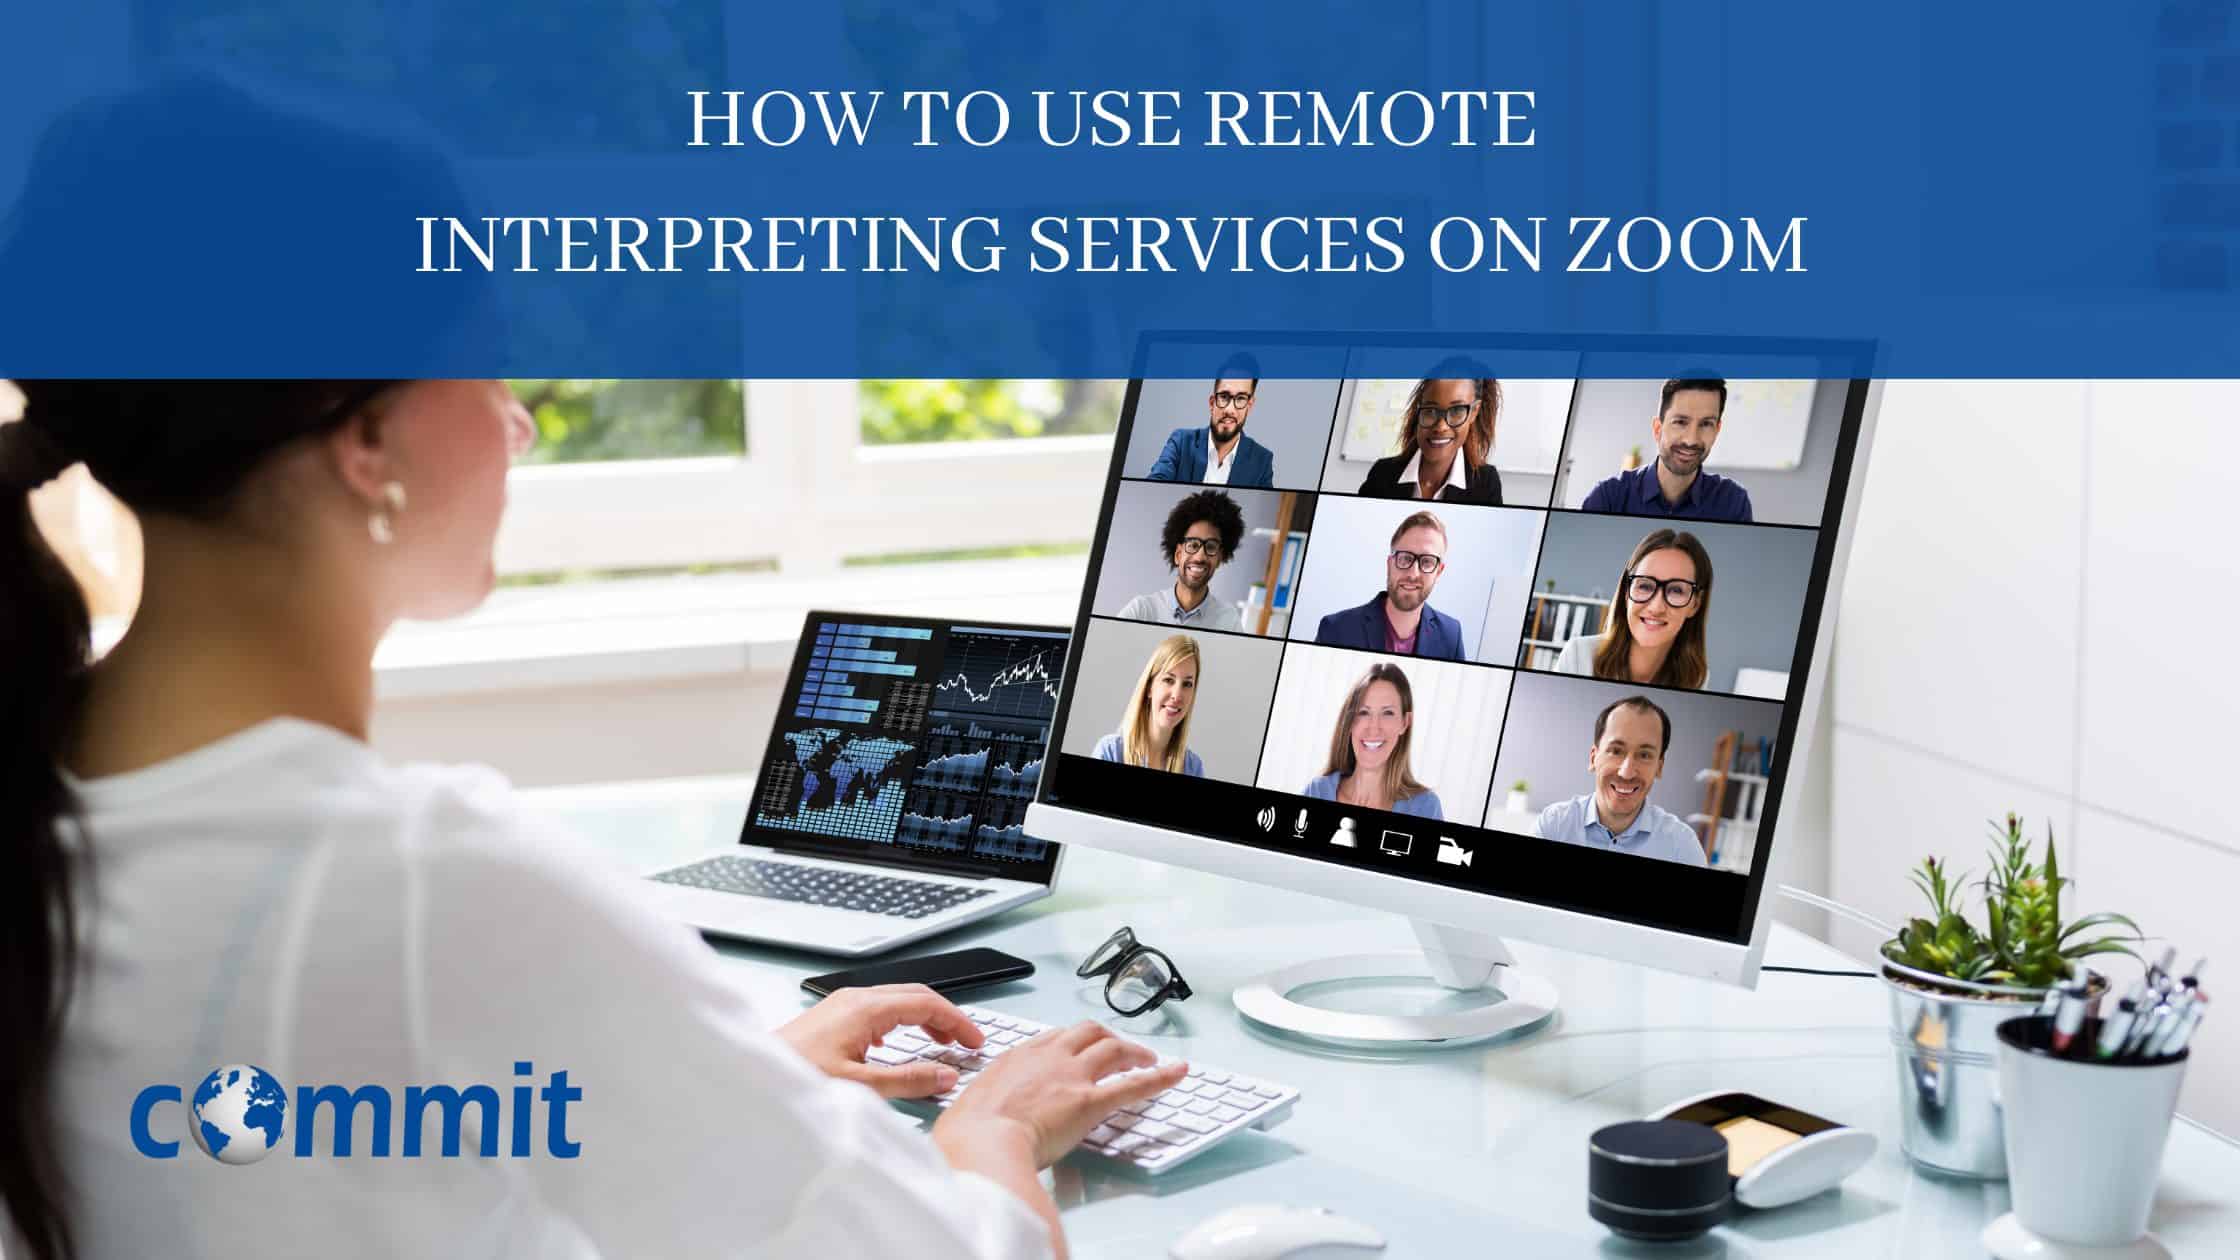 How to Use Remote Interpreting Services on Zoom